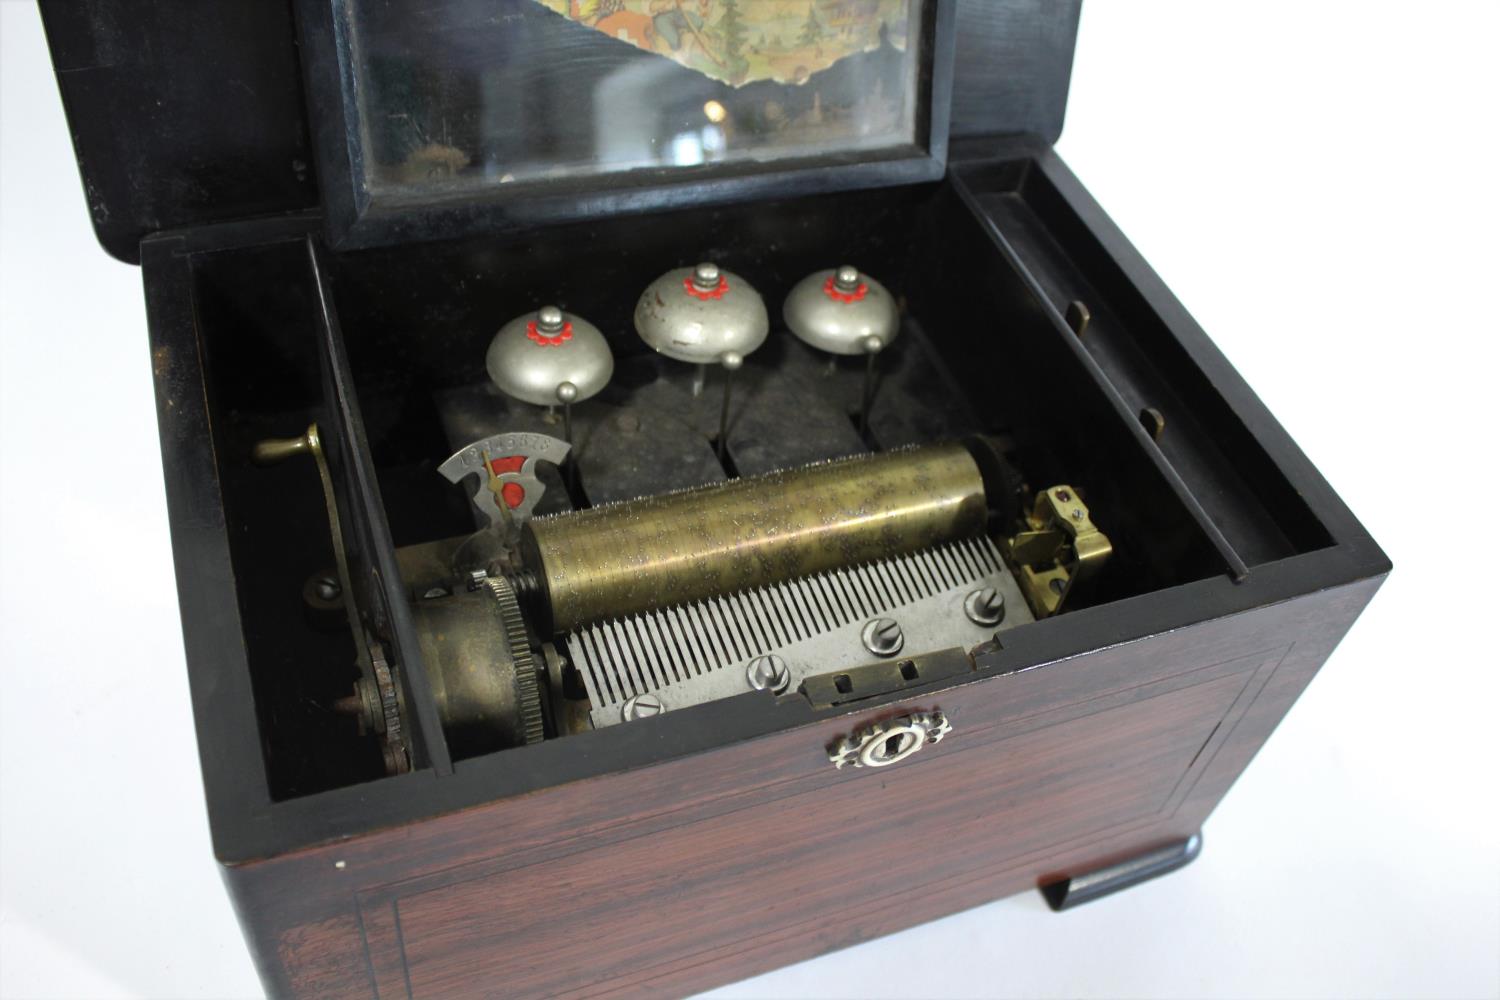 VICTORIAN MUSIC BOX - 8 AIRS a musical box with an 8 air movement and striking on 3 bells, with - Image 4 of 5